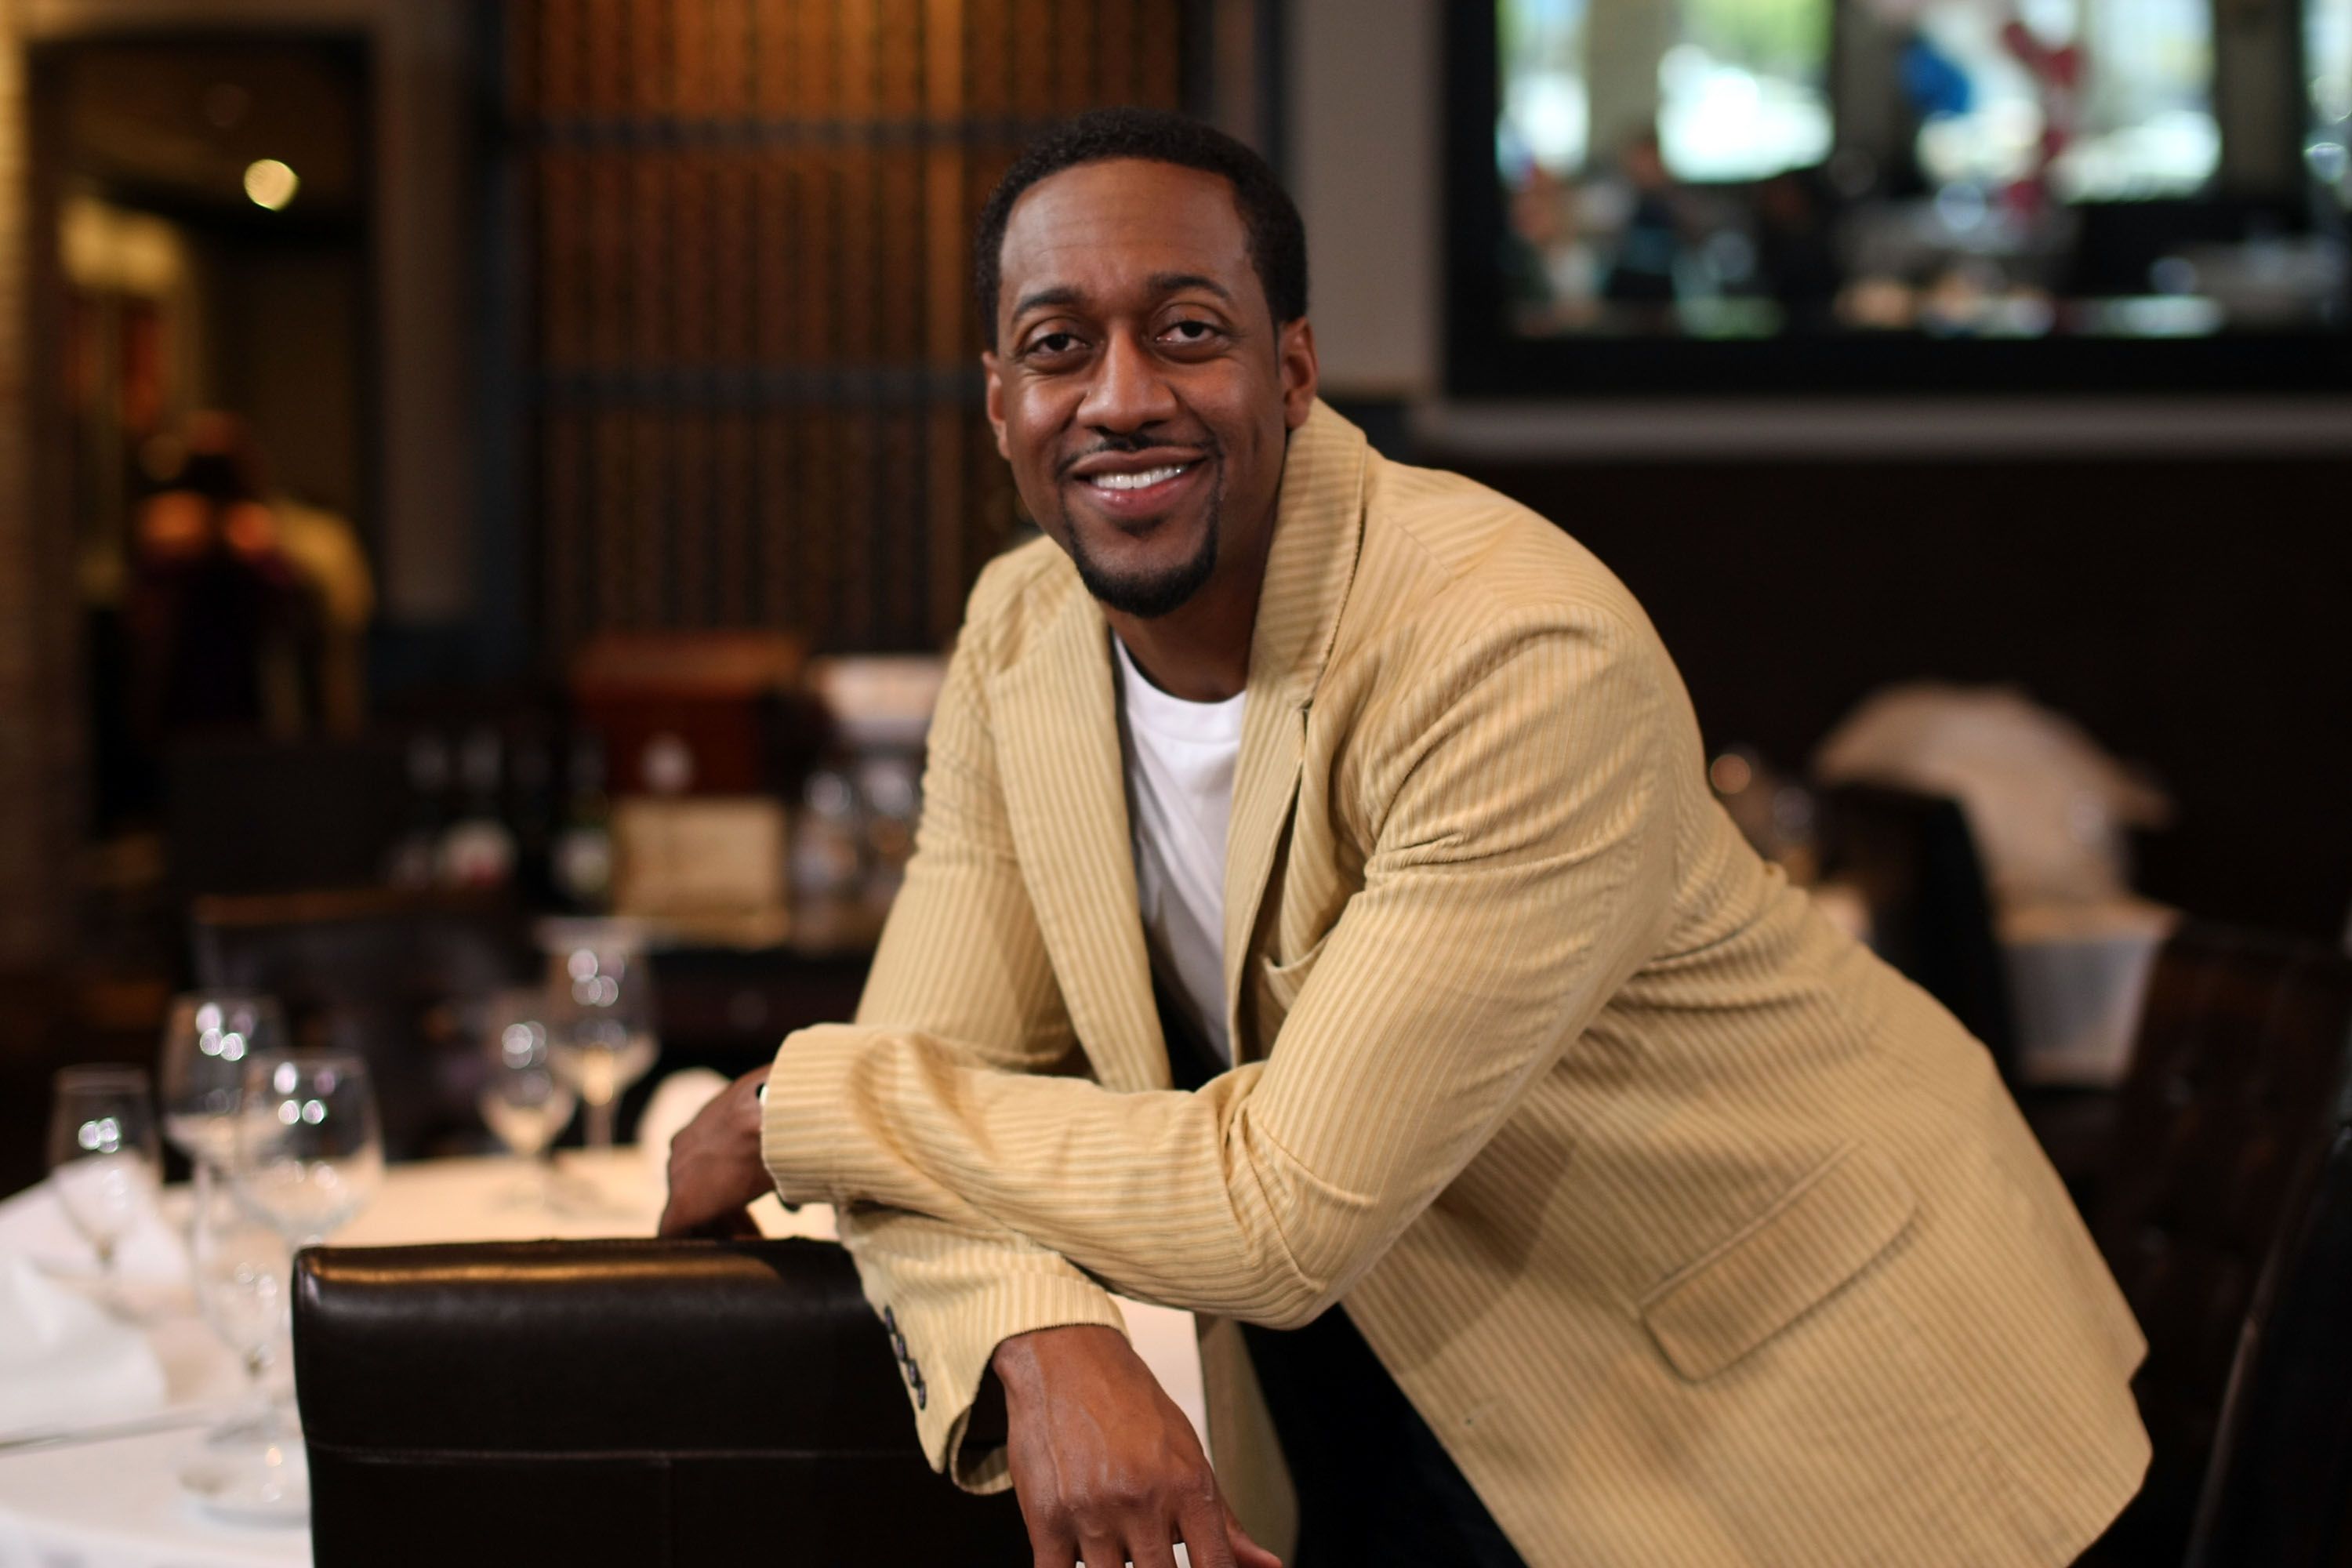 Jaleel White on the set of "Road to the Altar"  in Encino, California in April 2009 | Photo: Getty Images